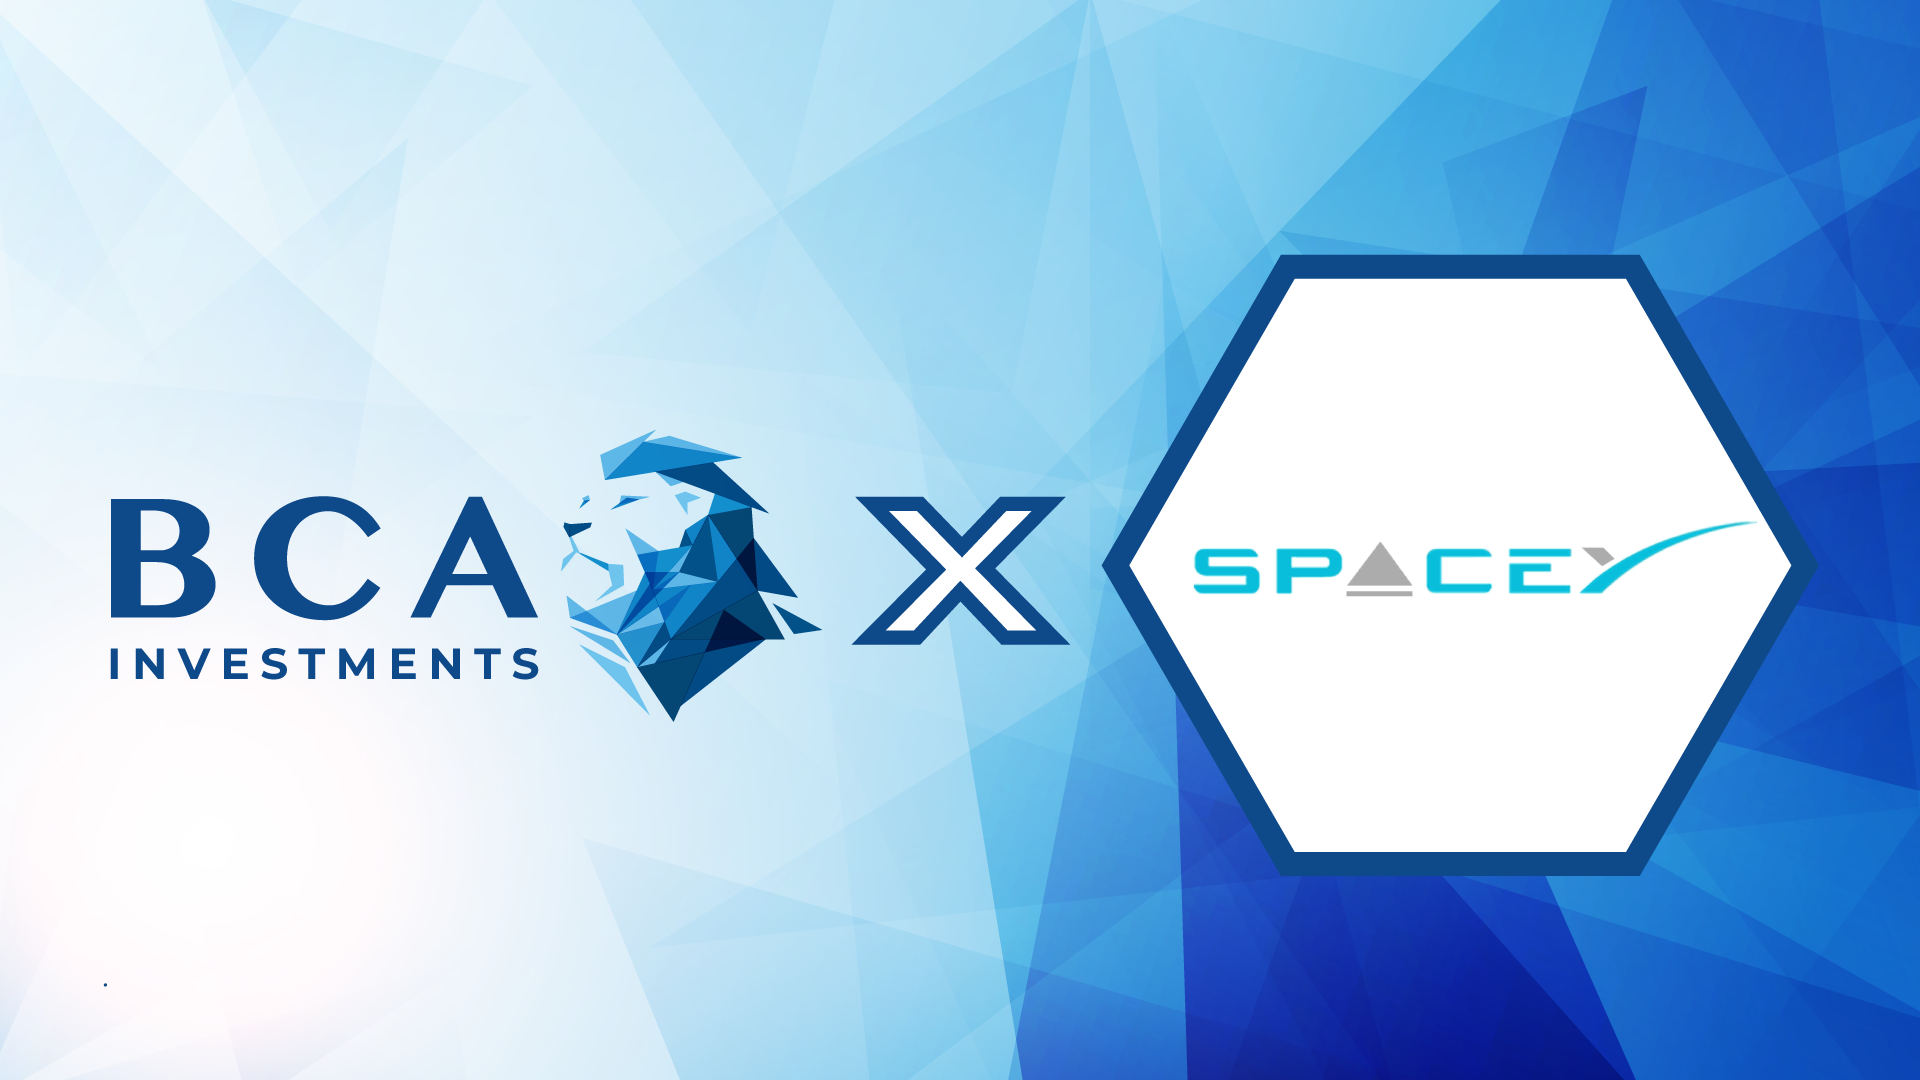 Partnership: SpaceY 2025 x BCA investments